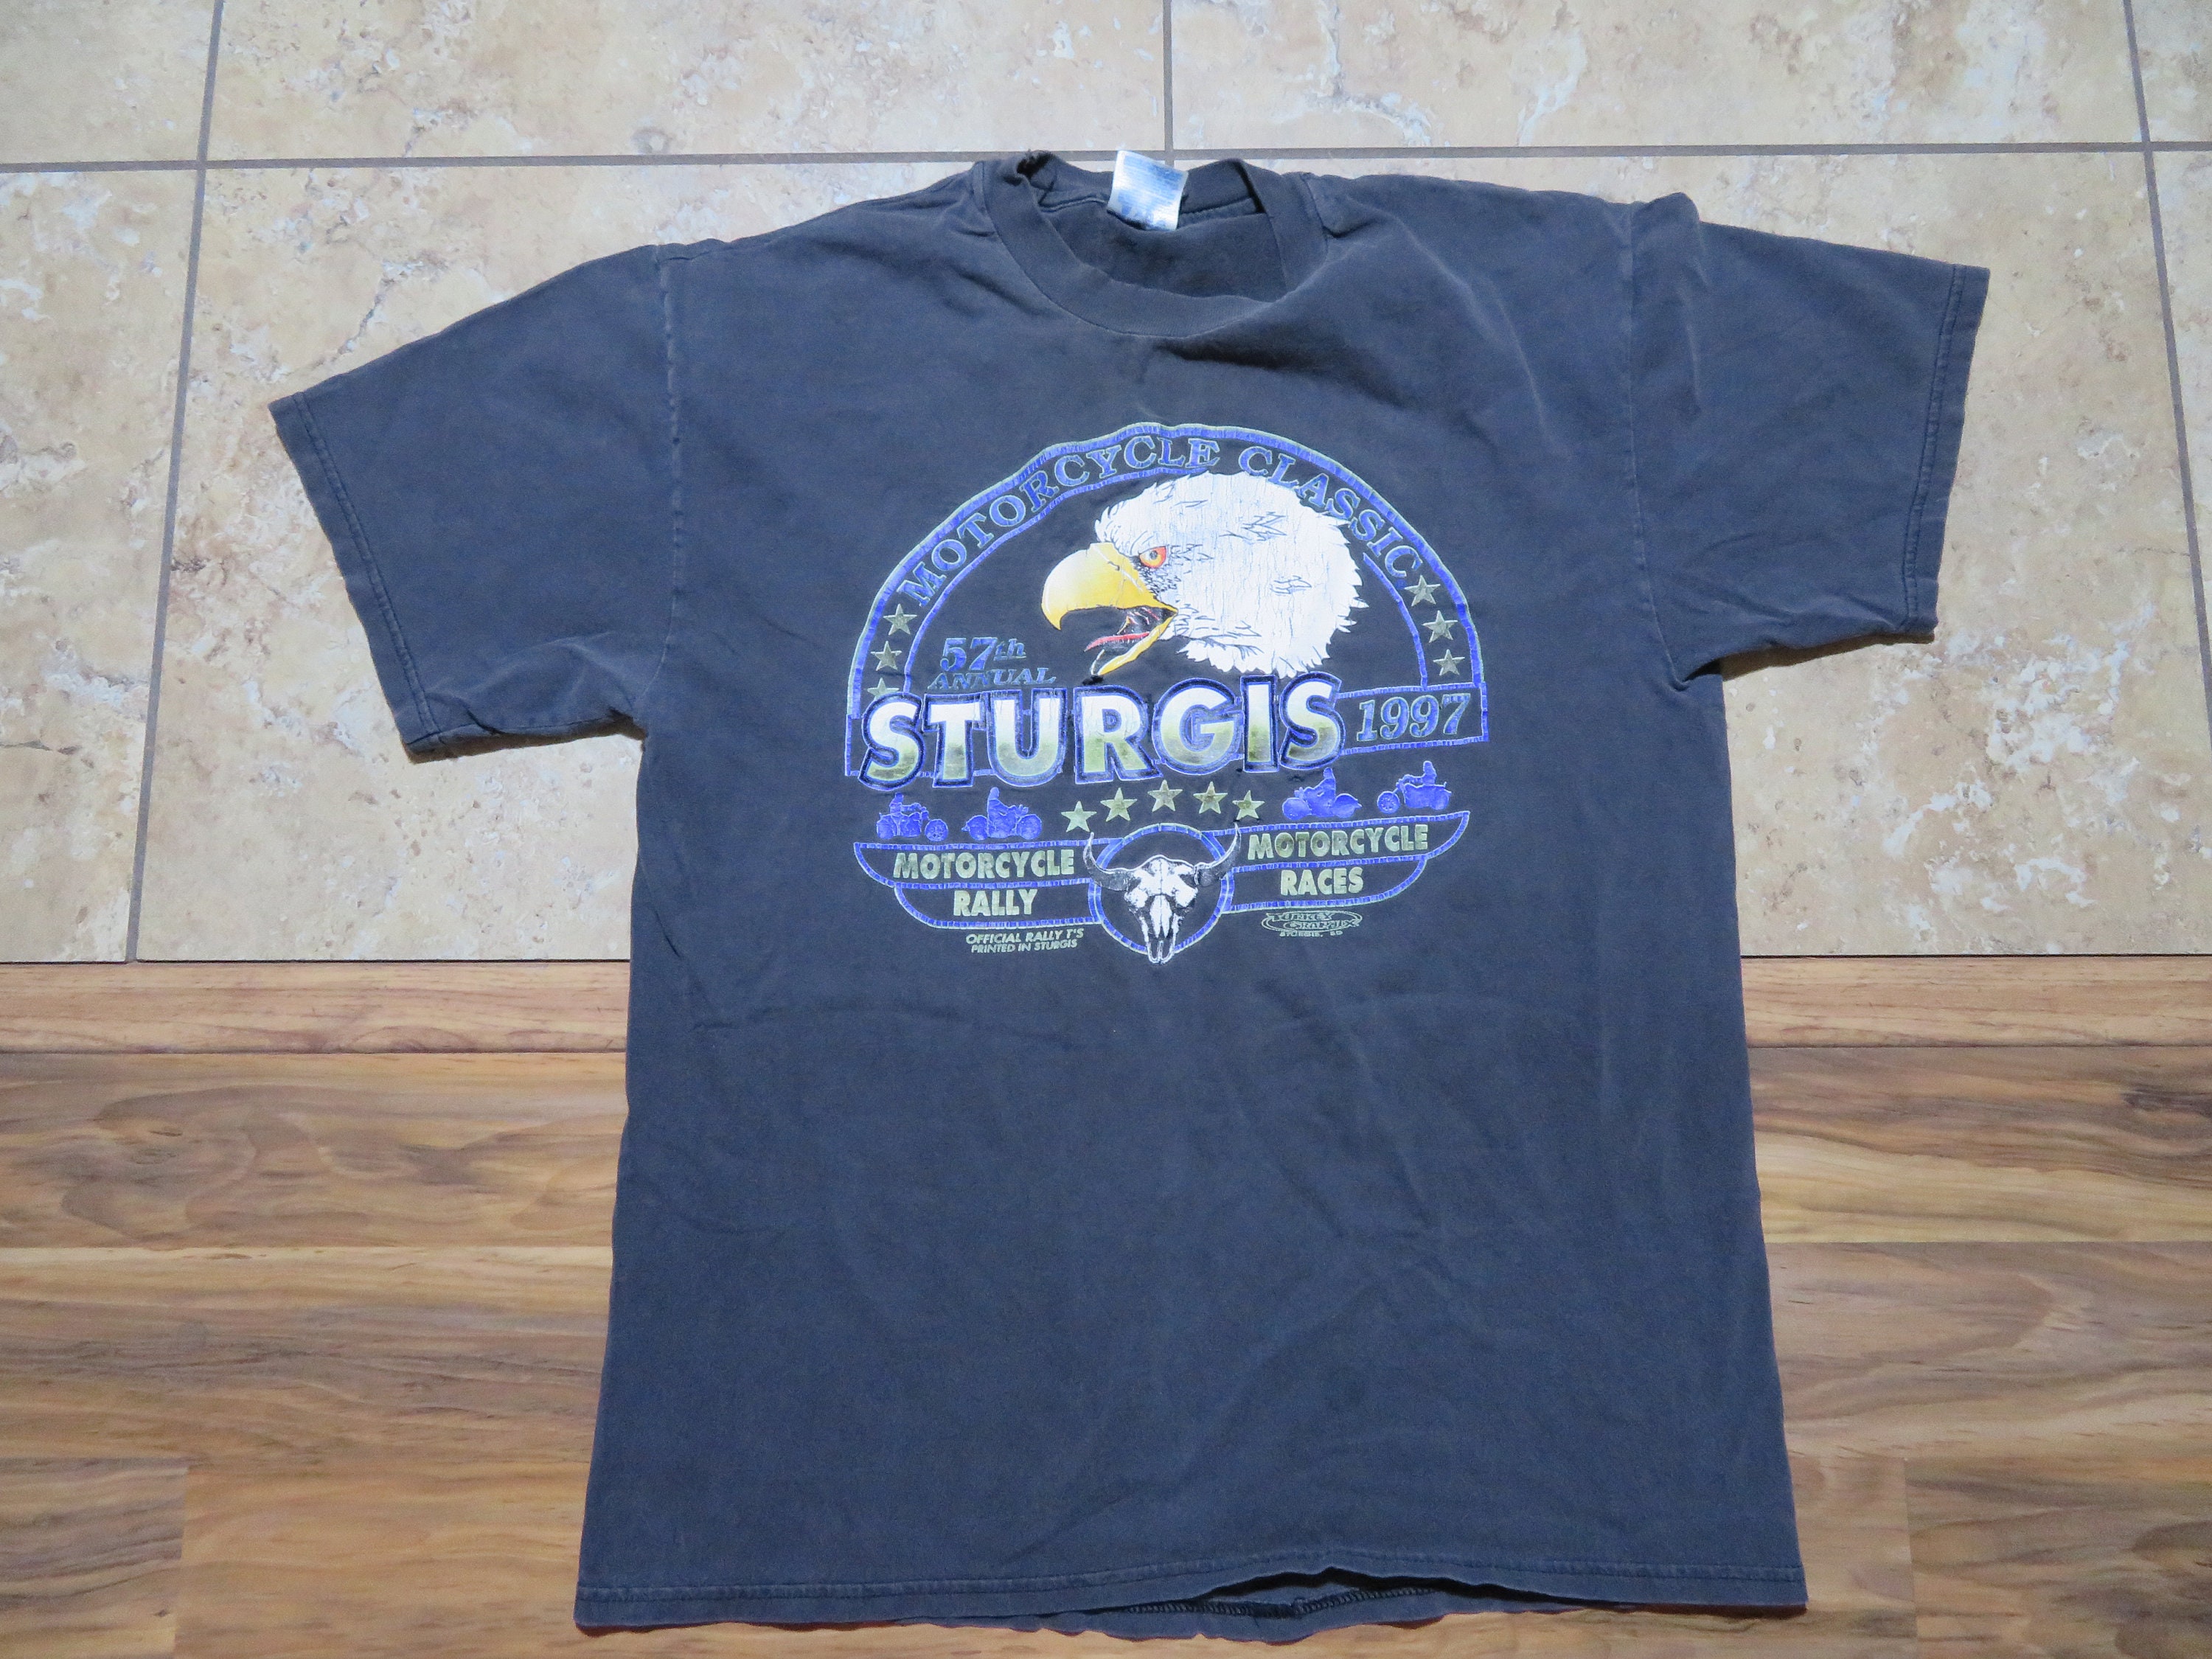 Vintage STURGIS 1997 Motorcycle Rally T-Shirt 57th Annual | Etsy